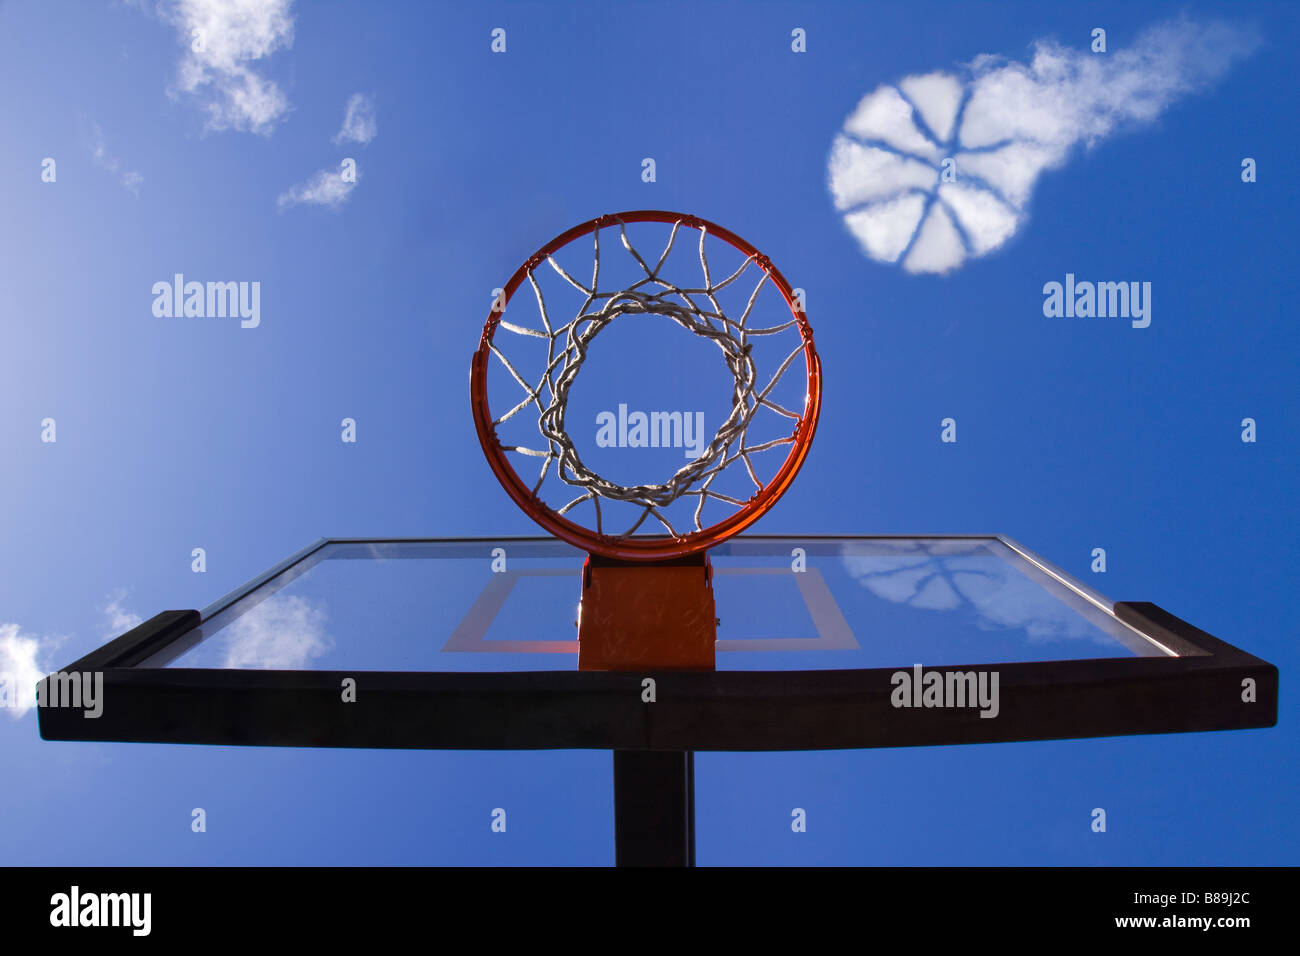 Cloud in the sky in the shape of a basketball approaching a basketball hoop as if it is about to go into the net Stock Photo